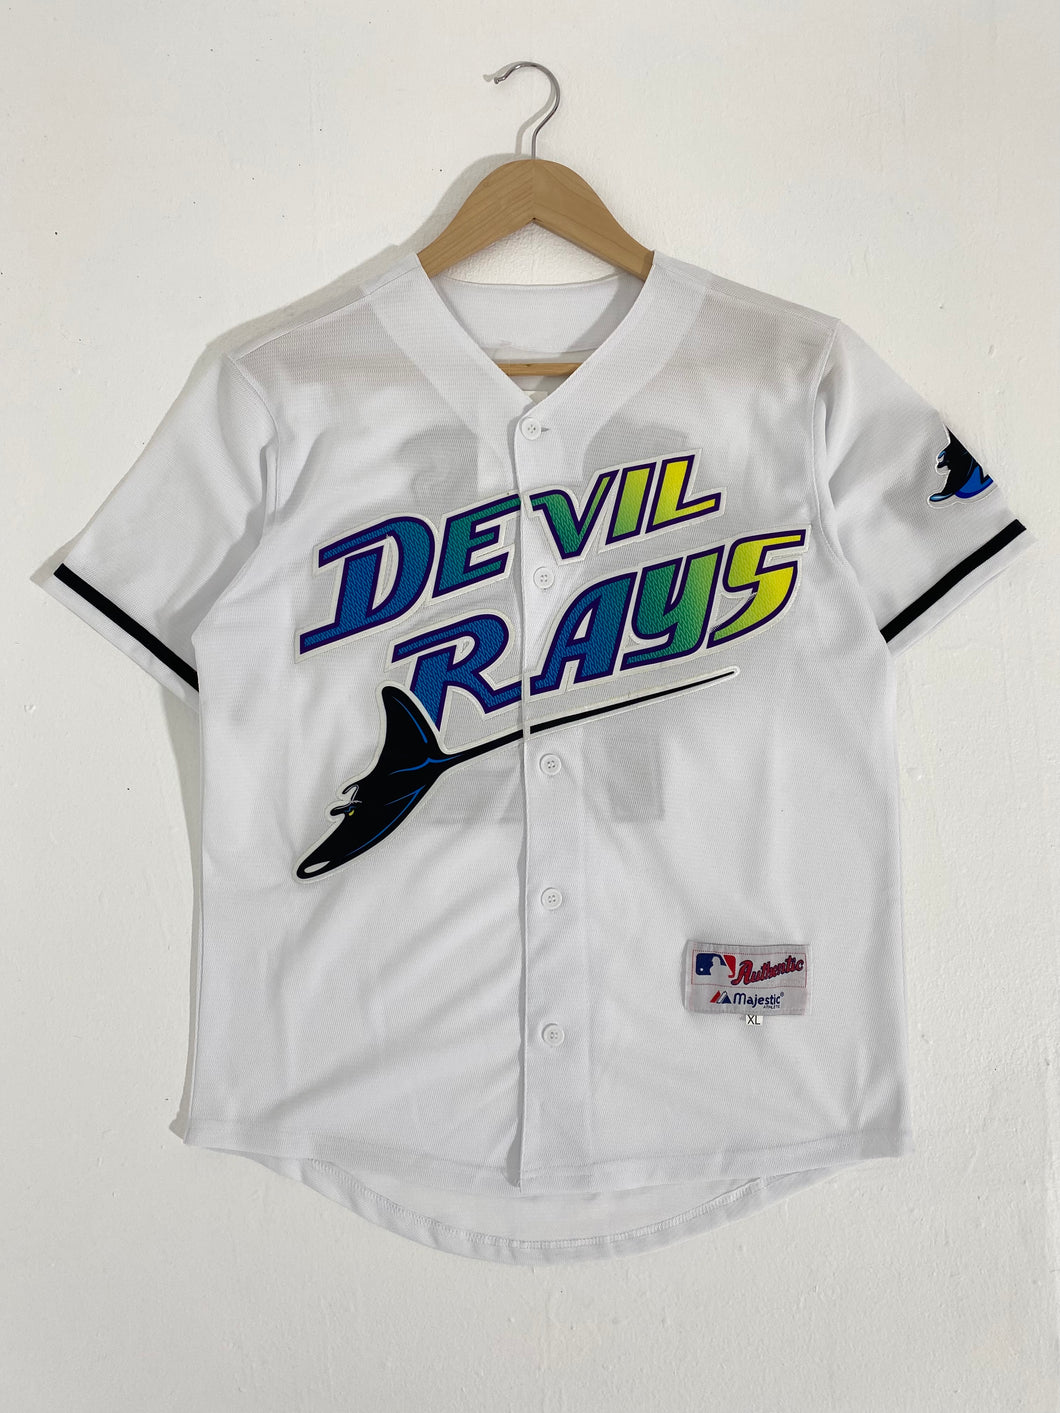 tampa bay rays vintage jersey